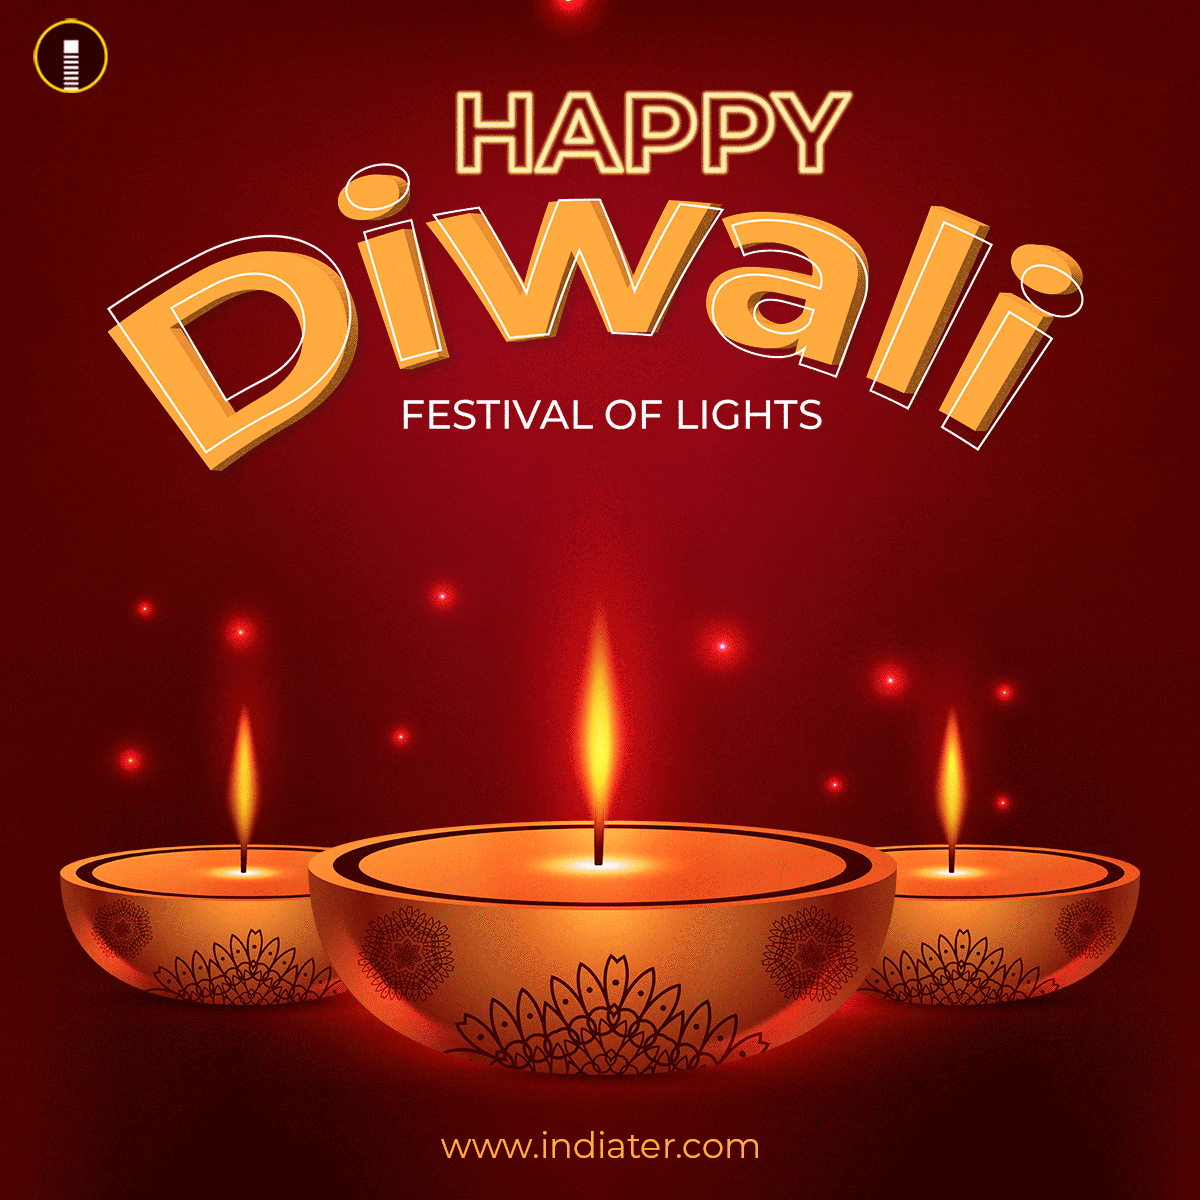 Download Incredible Collection of 999+ Happy Diwali Images in Full 4K